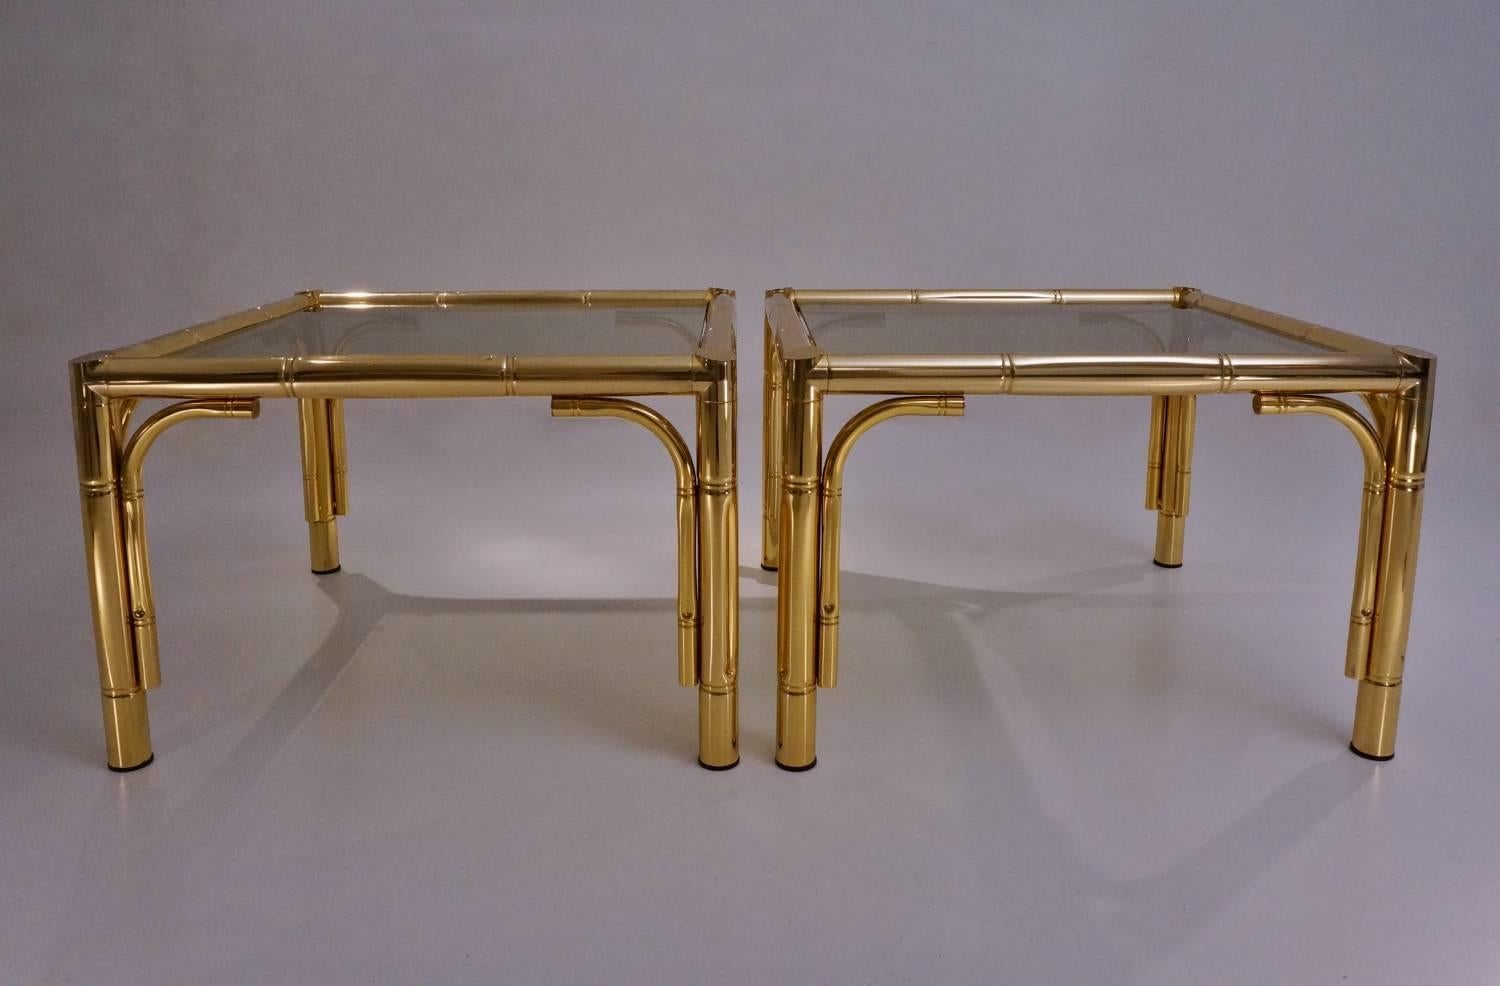 Hollywood Regency Maison Baguès Tables, Pair in Brass Bamboo Effect, 1970s, French